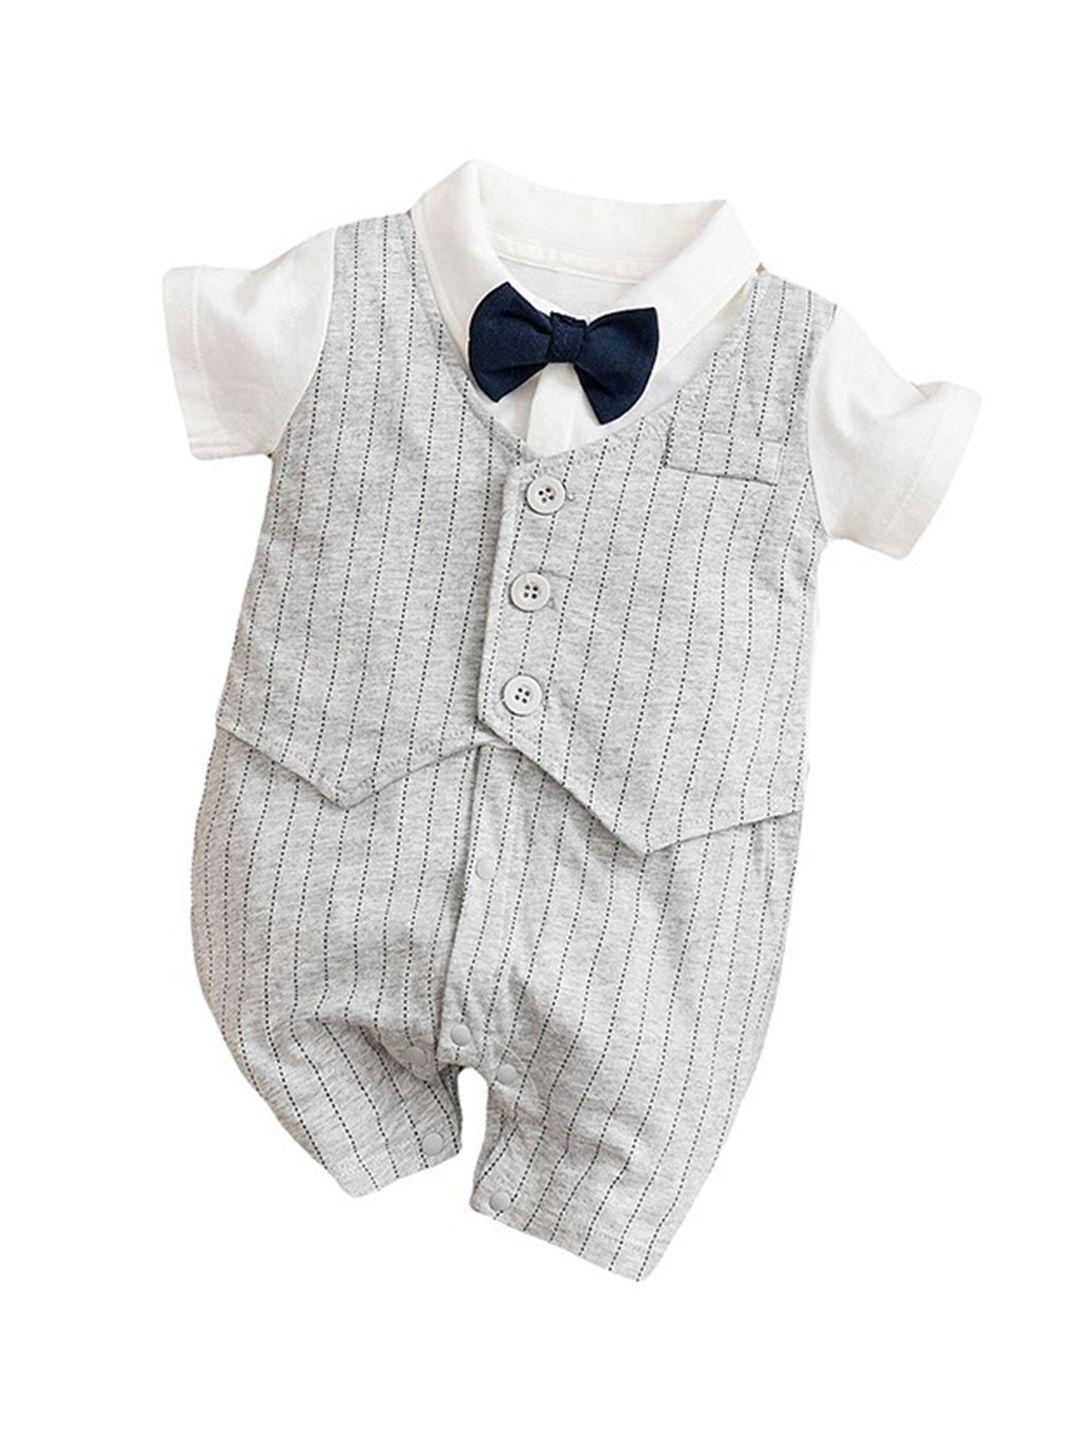 stylecast infant boys grey & white striped cotton rompers